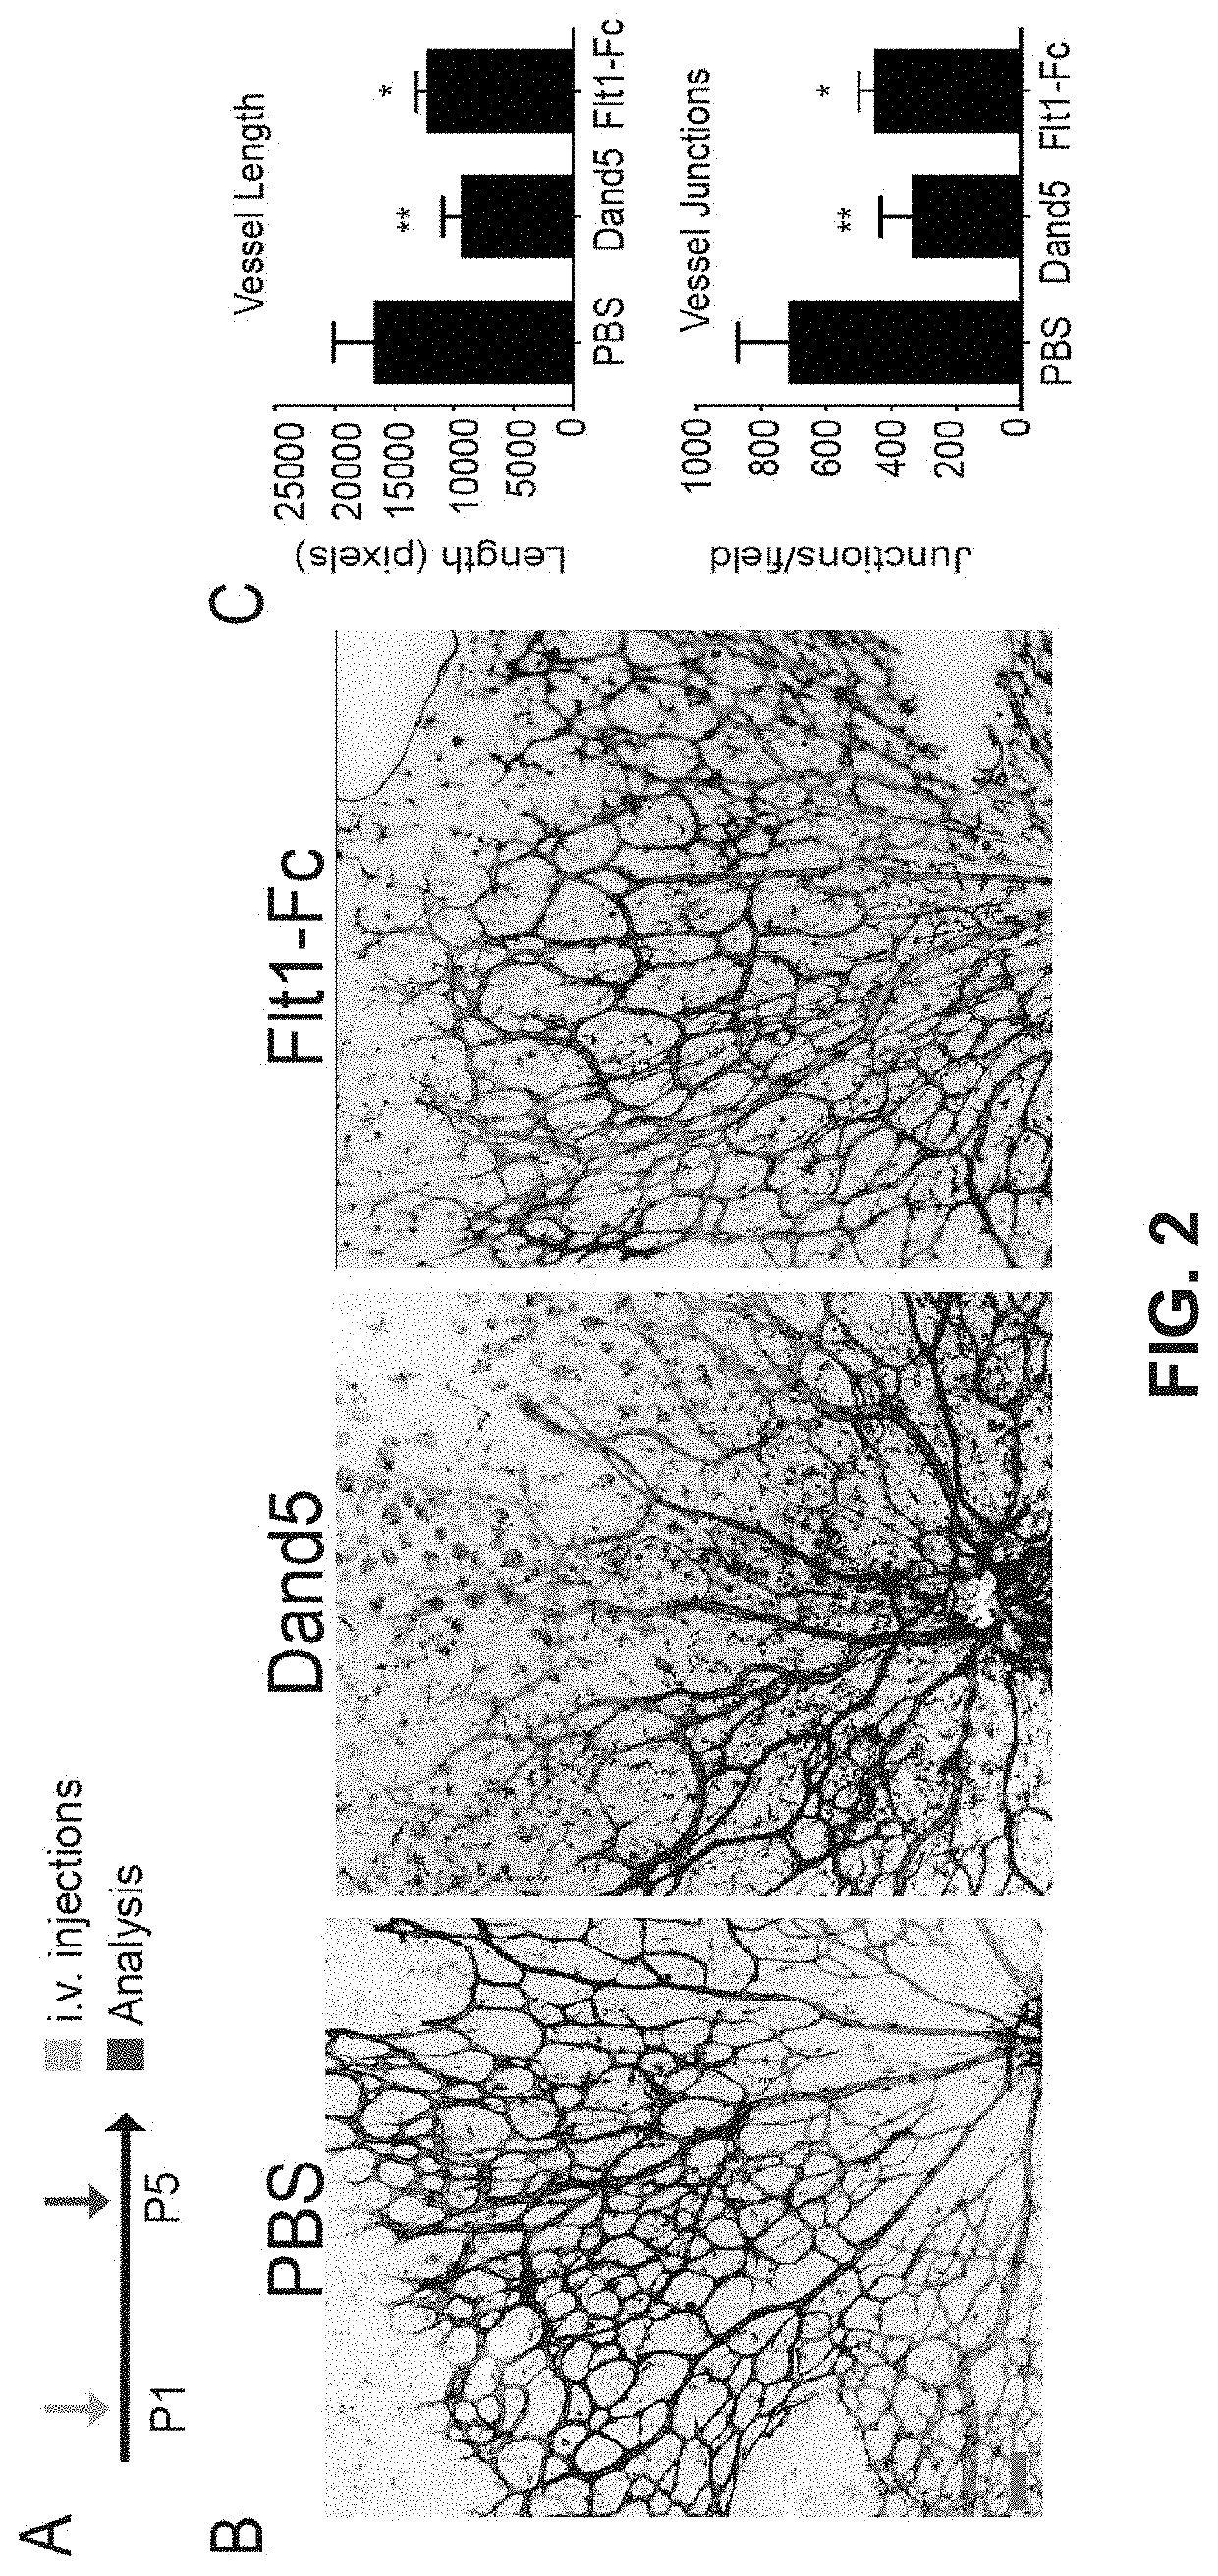 Uses of dan family bmp antagonists for inhibiting ocular neovascularization and treating ocular conditions